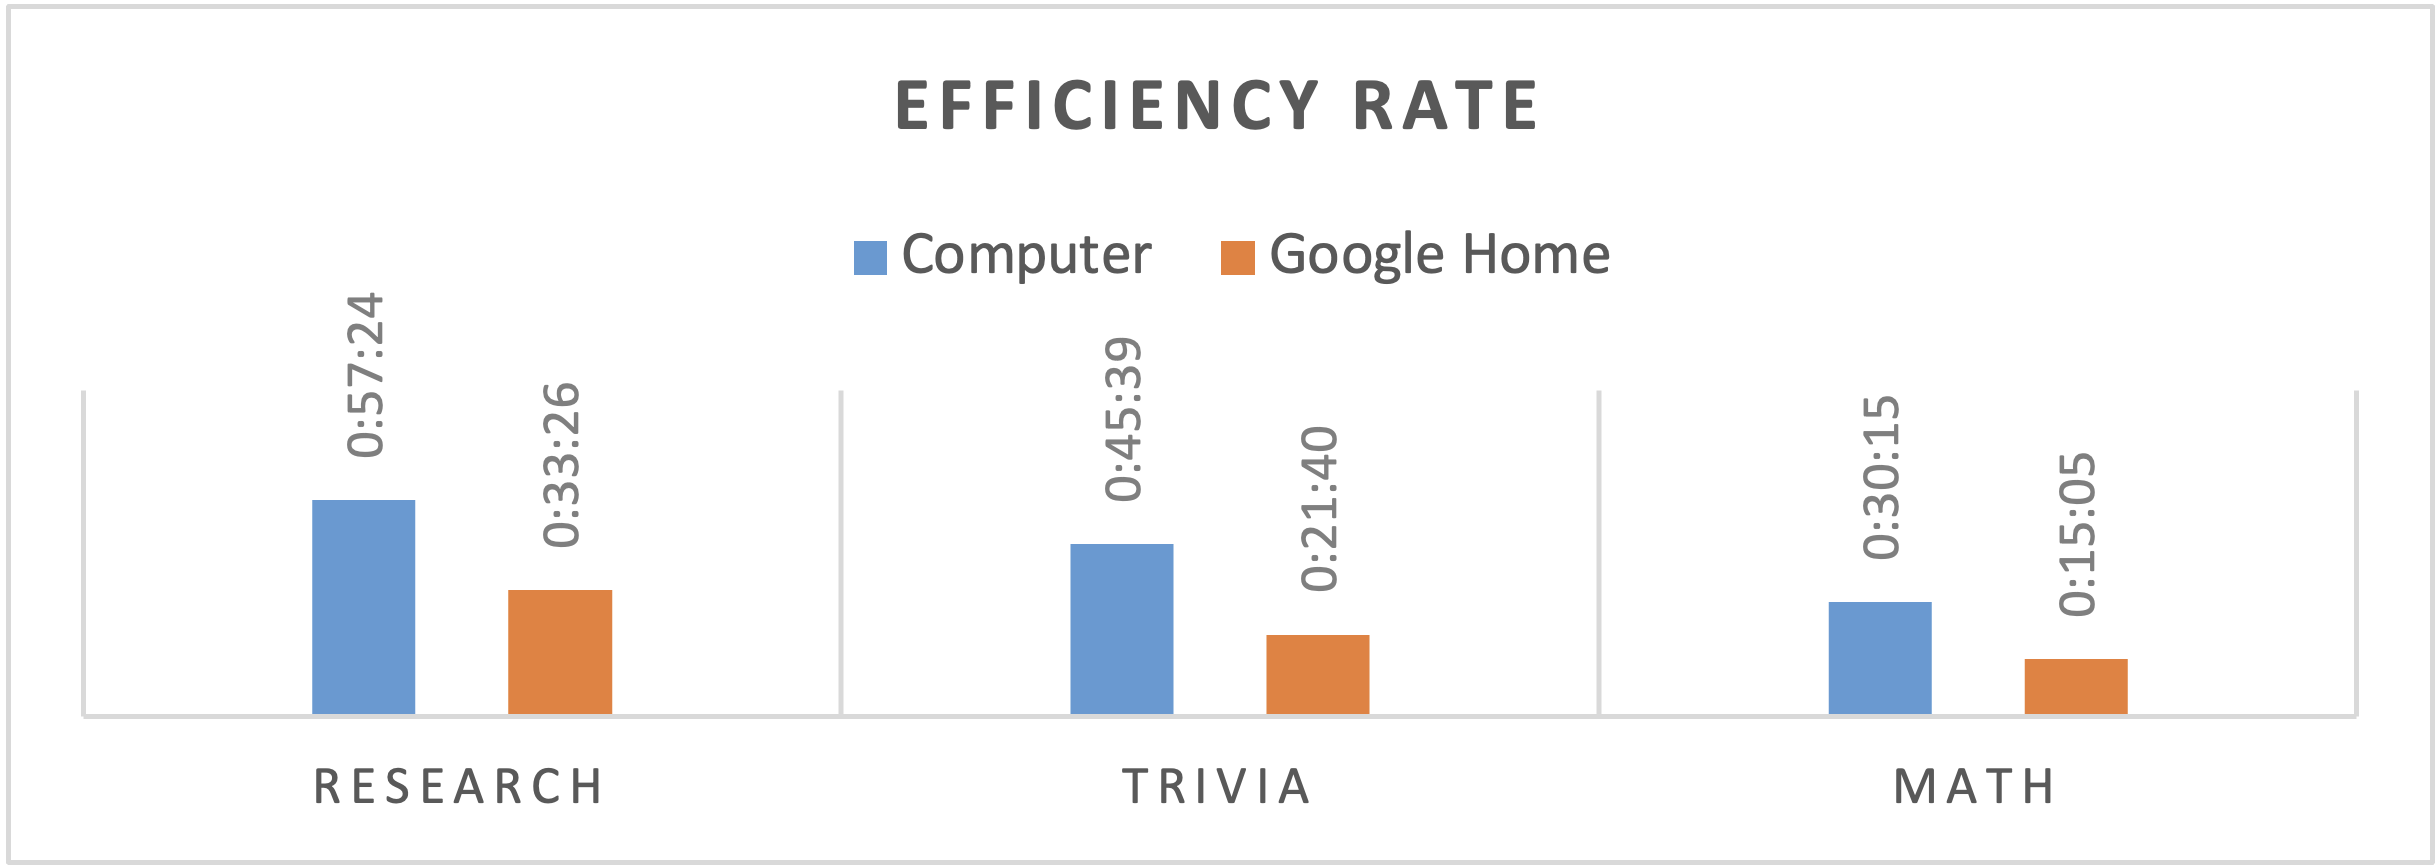 Bar chart of efficiency rate and overall completion time for each informational category (research, trivia, mathematics) showing faster retrieval rates on Google Home for all categories.